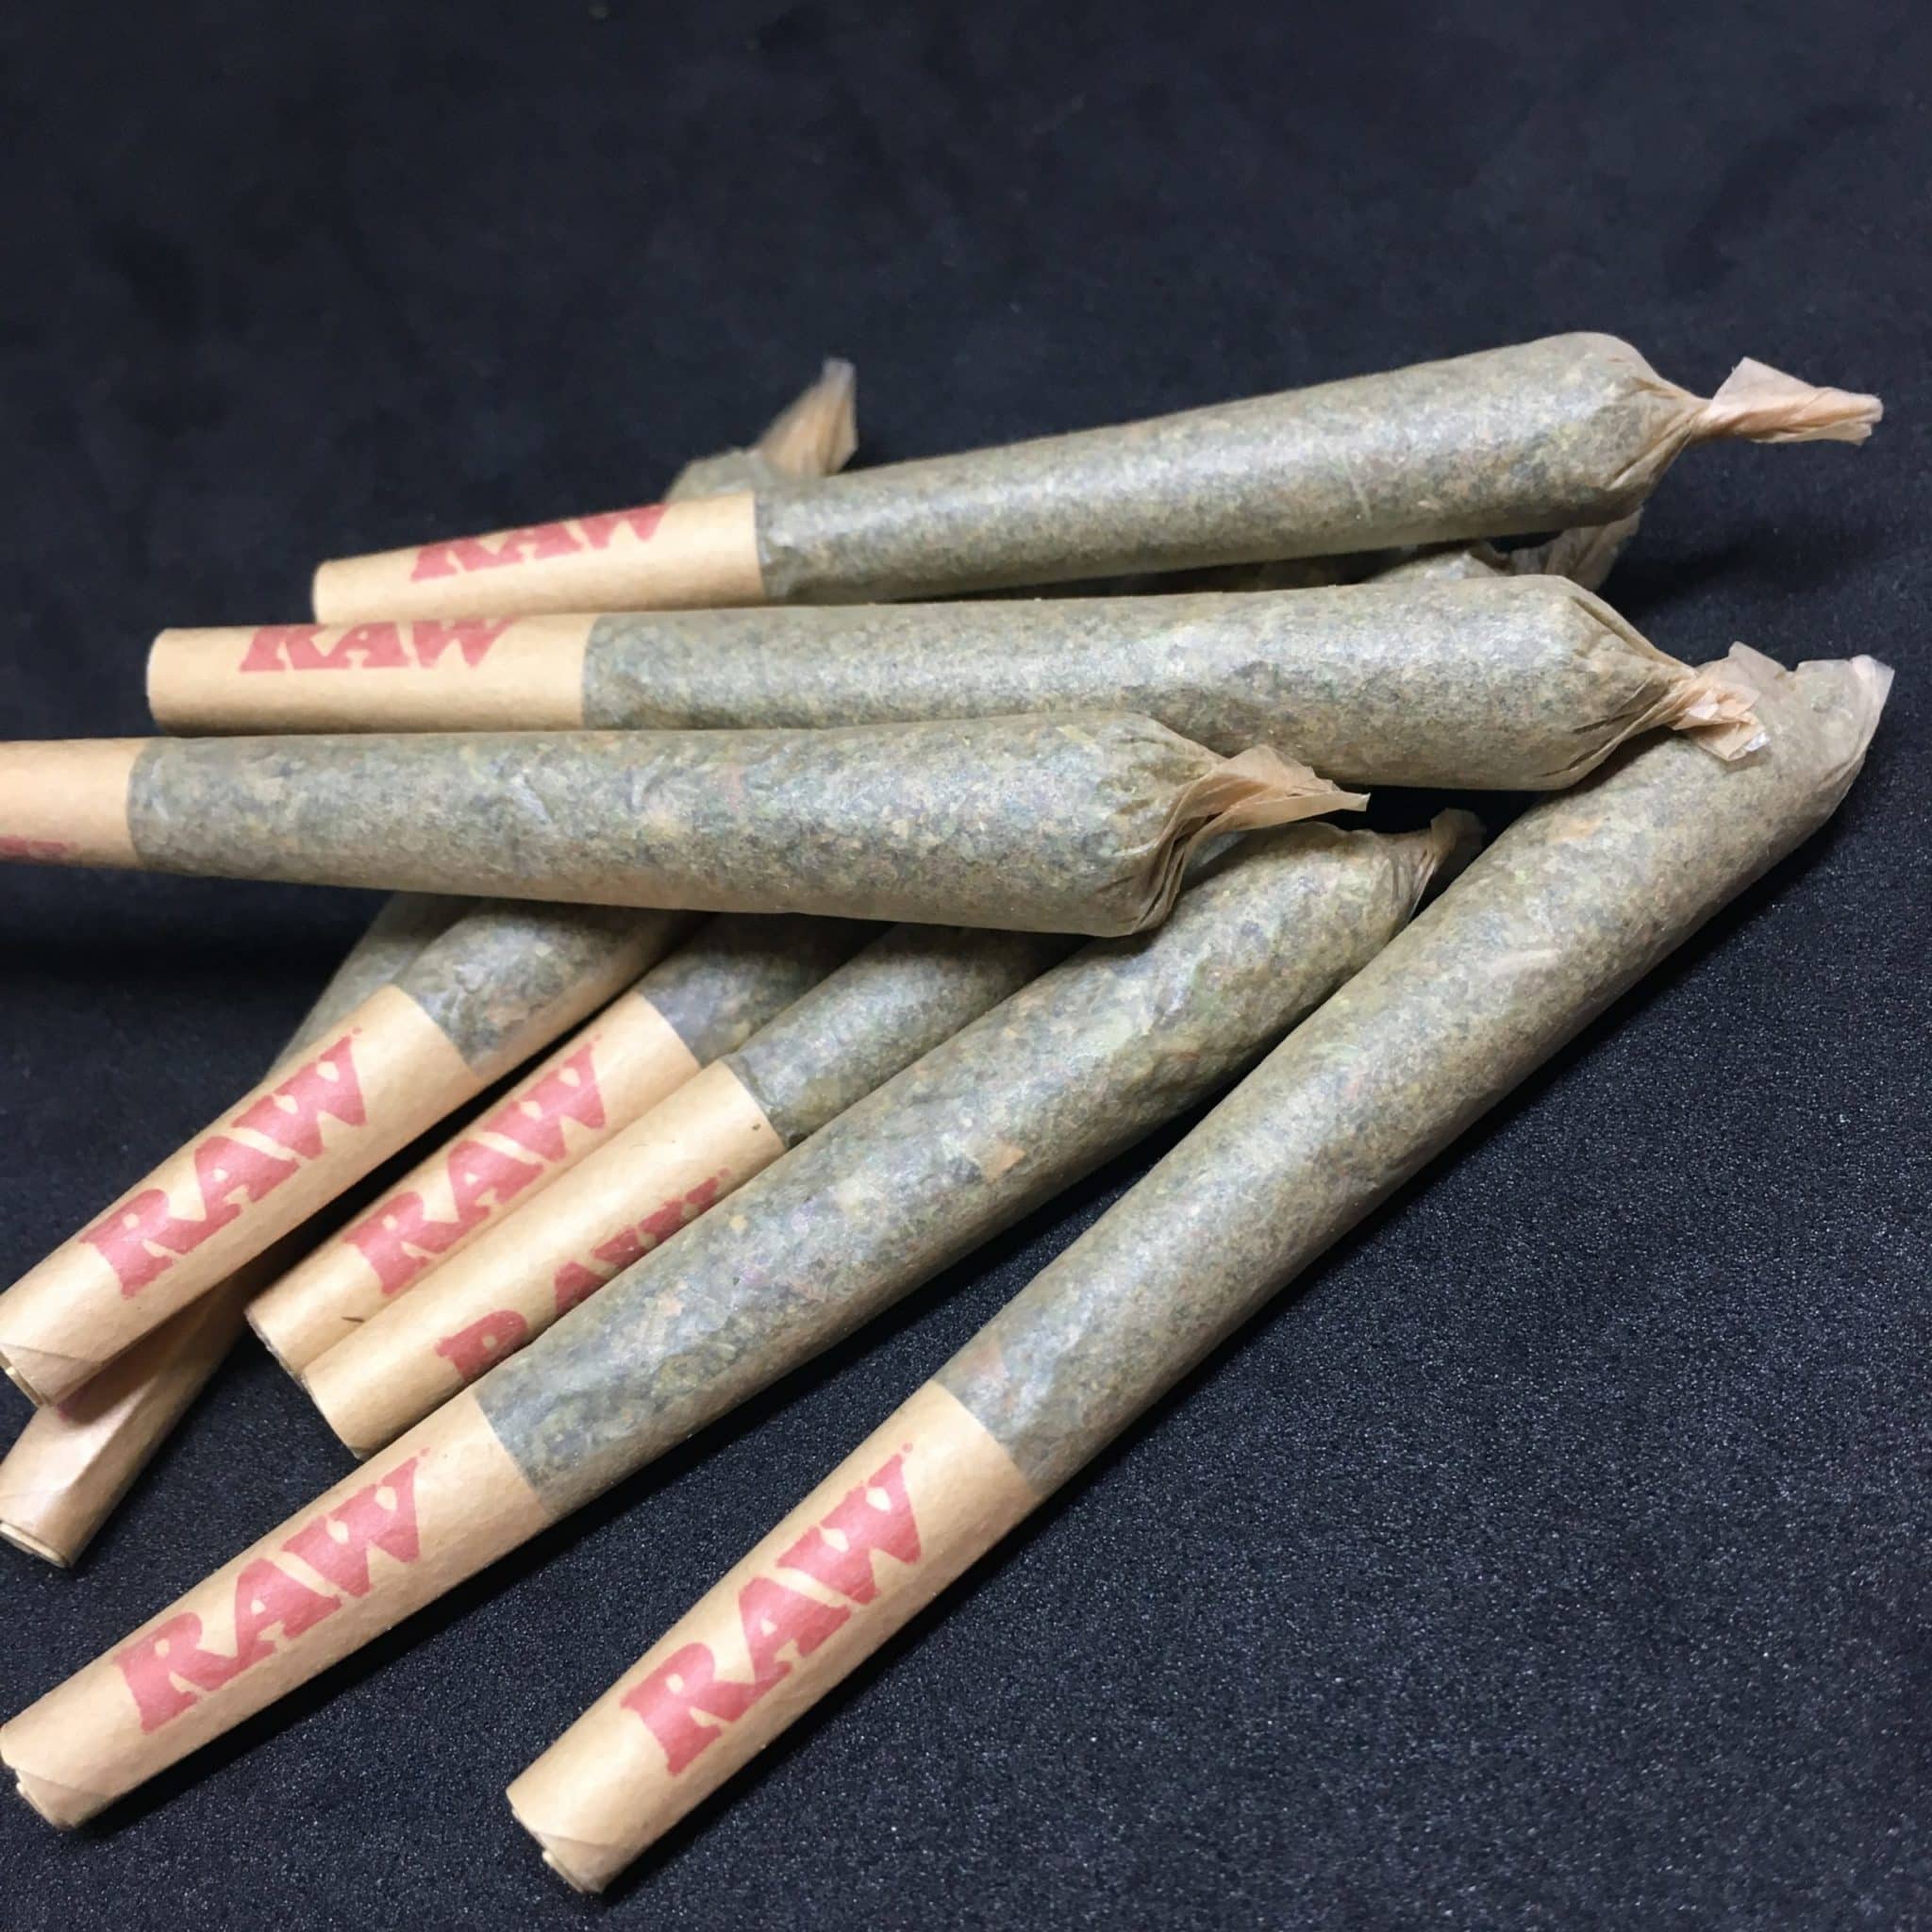 0.6g preroll small many scaled - St. Patrick's Day Weed Delivery Toronto - Cannabis Delivery Toronto - Marijuana Delivery Toronto - Weed Edibles Delivery Toronto - Kush Delivery Toronto - Same Day Weed Delivery in Toronto - 24/7 Weed Delivery Toronto - Hash Delivery Toronto - We are Kind Flowers - Premium Cannabis Delivery in Toronto with over 200 menu items. We’re an experienced weed delivery in Toronto and we deliver all orders in a smell-proof, discreet package straight to your door. Proudly Canadian and happy to always serve you. We offer same day weed delivery toronto, cannabis delivery toronto, kush delivery toronto, edibles weed delivery toronto, hash delivery toronto, 24/7 weed delivery toronto, weed online delivery toronto